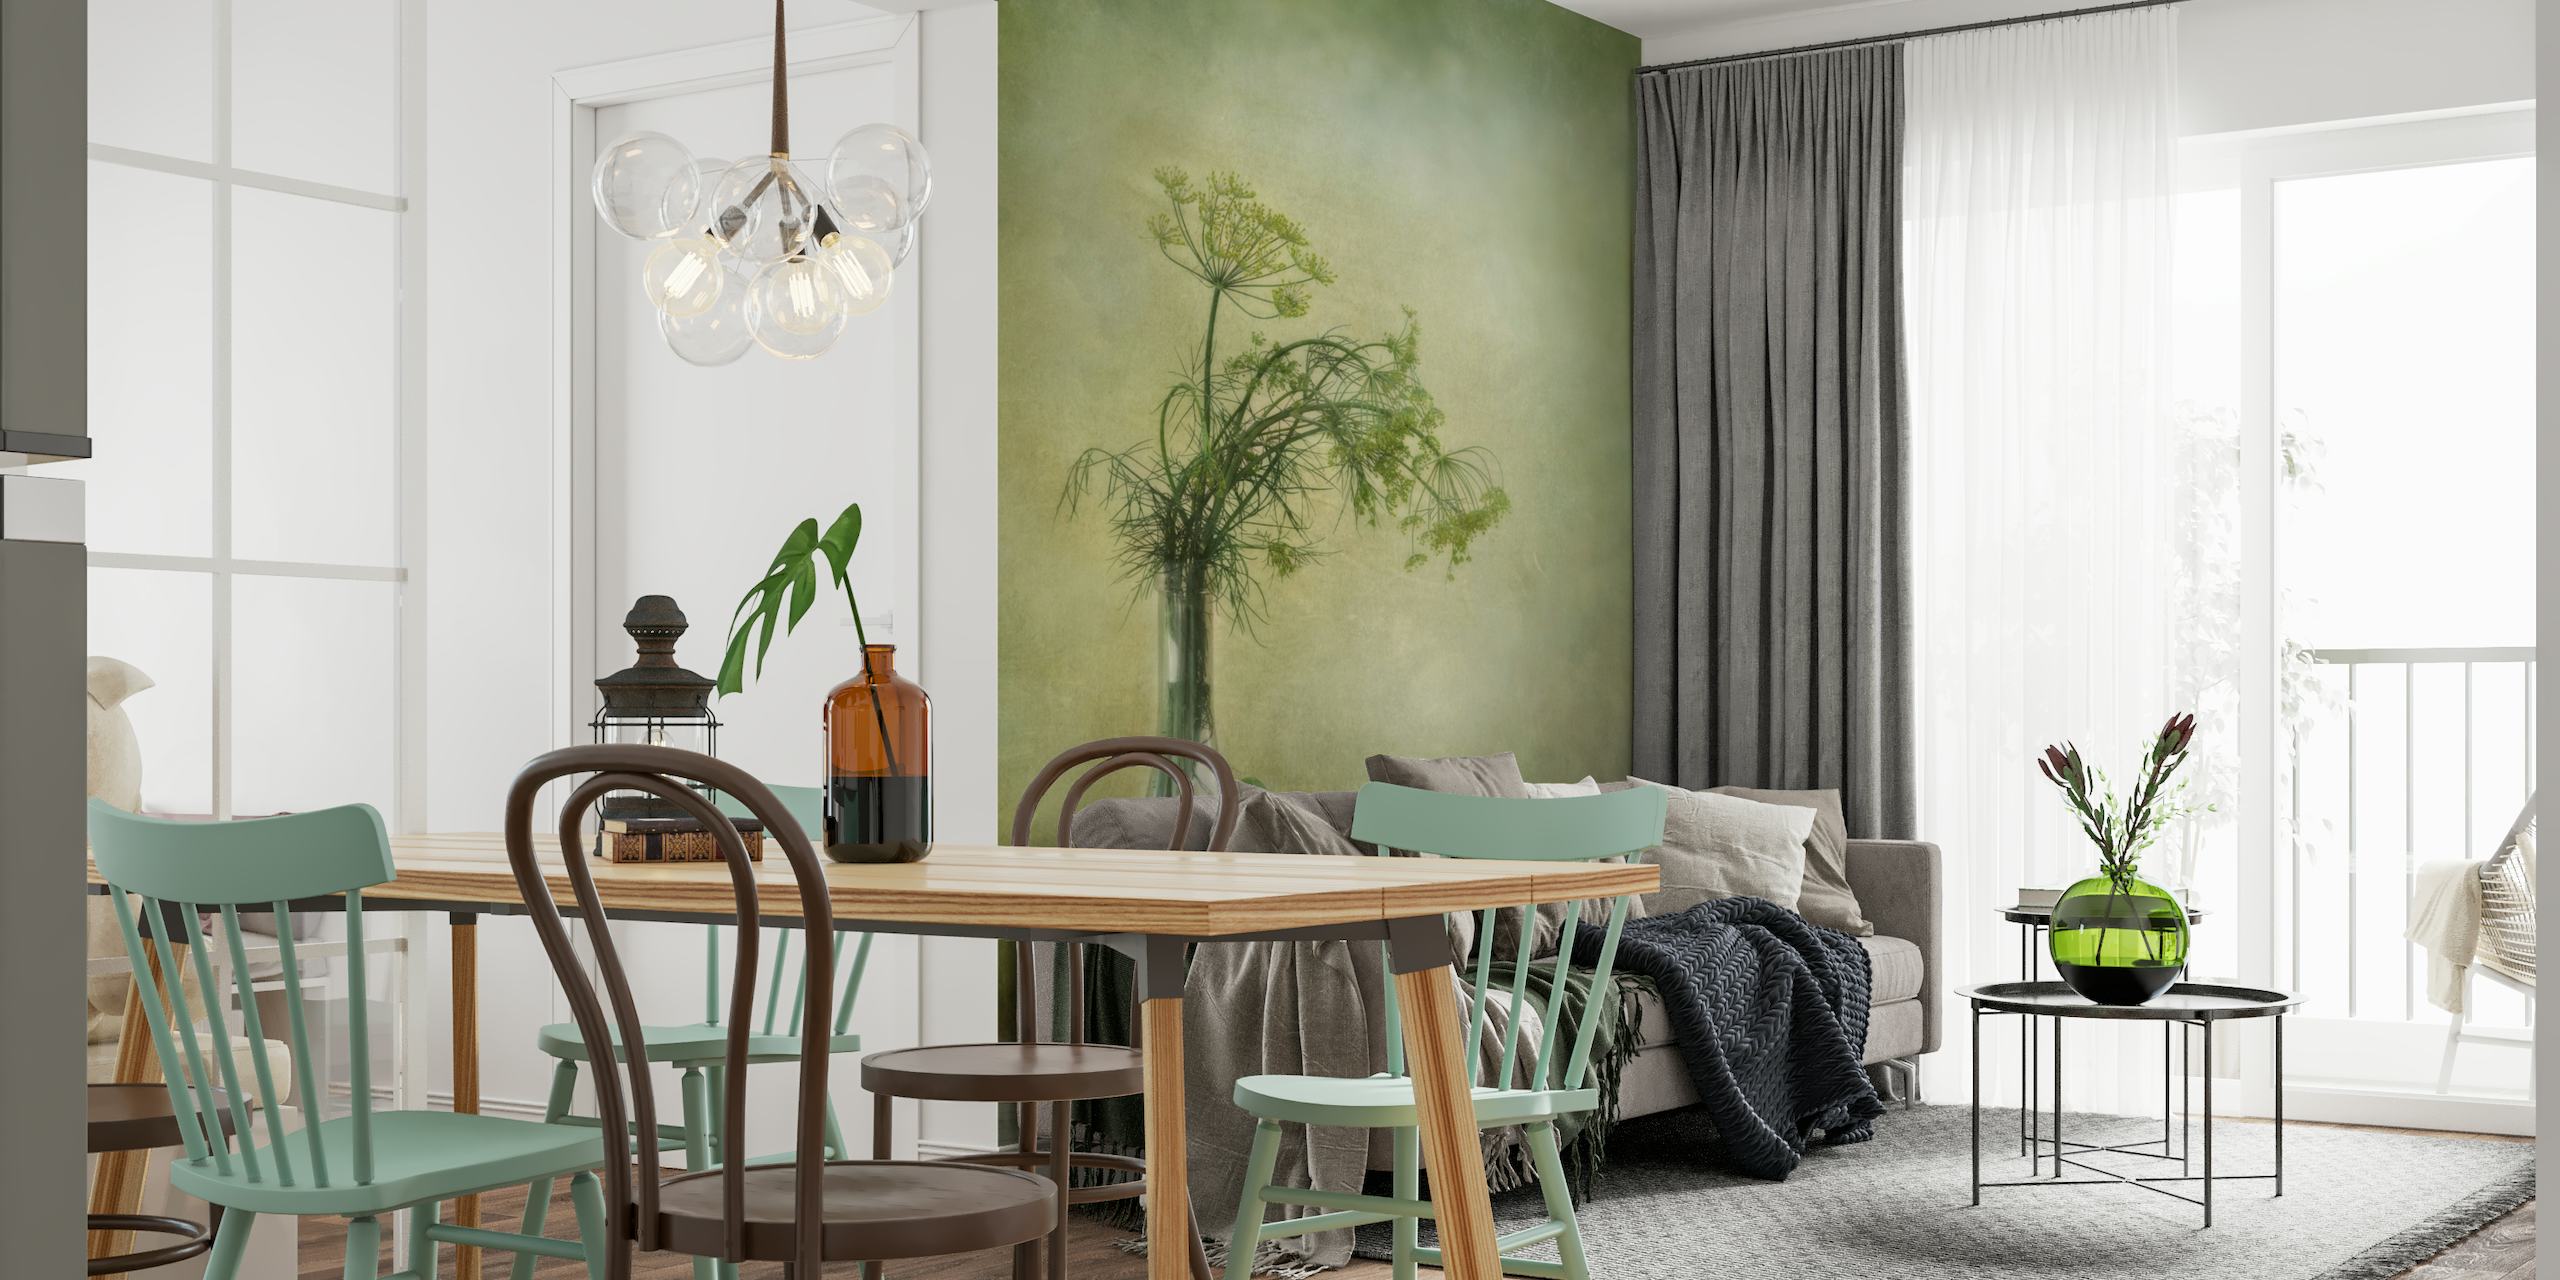 Wall mural featuring a vase with dill and a cucumber against a textured green background